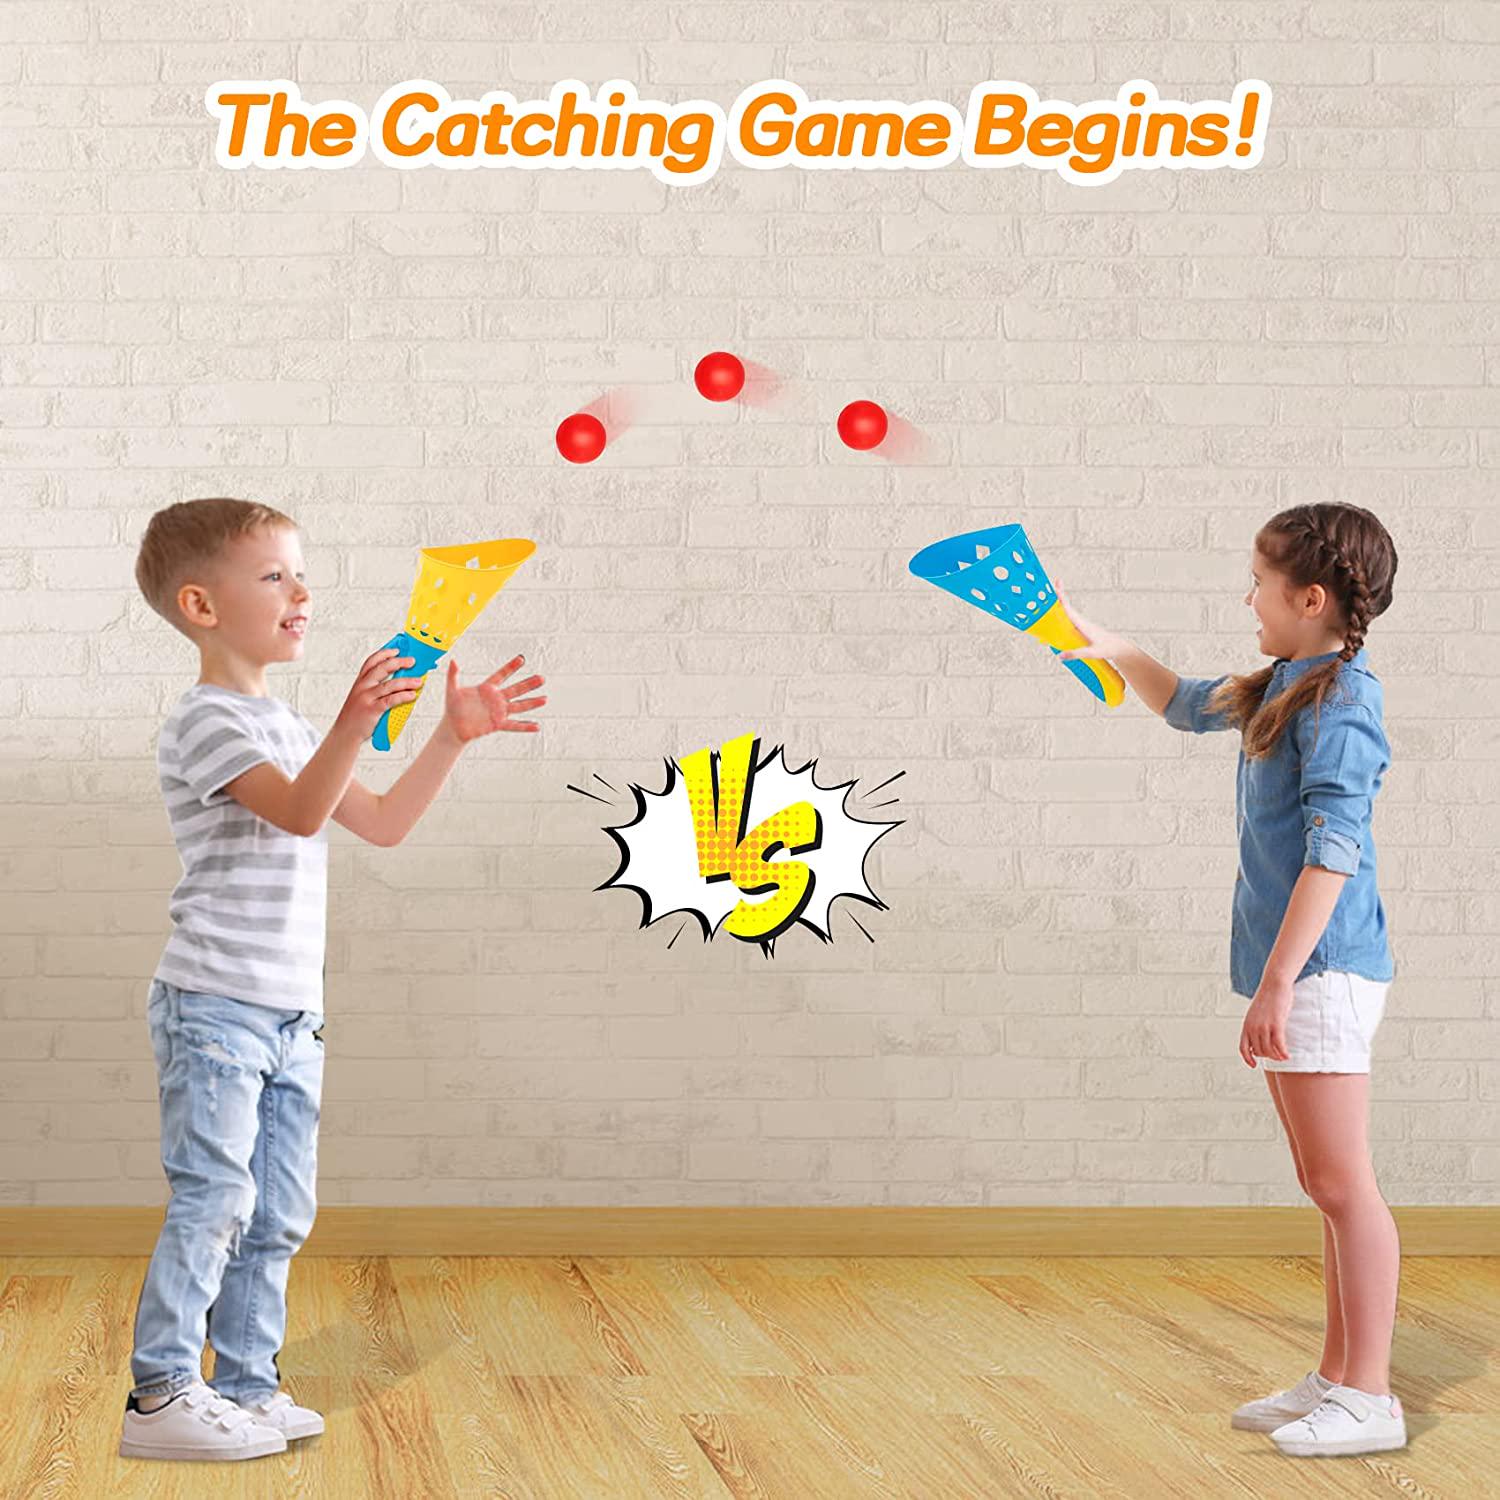 DuduLand, DuduLand 2 Catch Launcher Baskets and 6 Balls Outdoor Toys-- Sports Outdoor Play Toys Pop Catch Ball Games for Kids and Adults,Ideal Gifts!